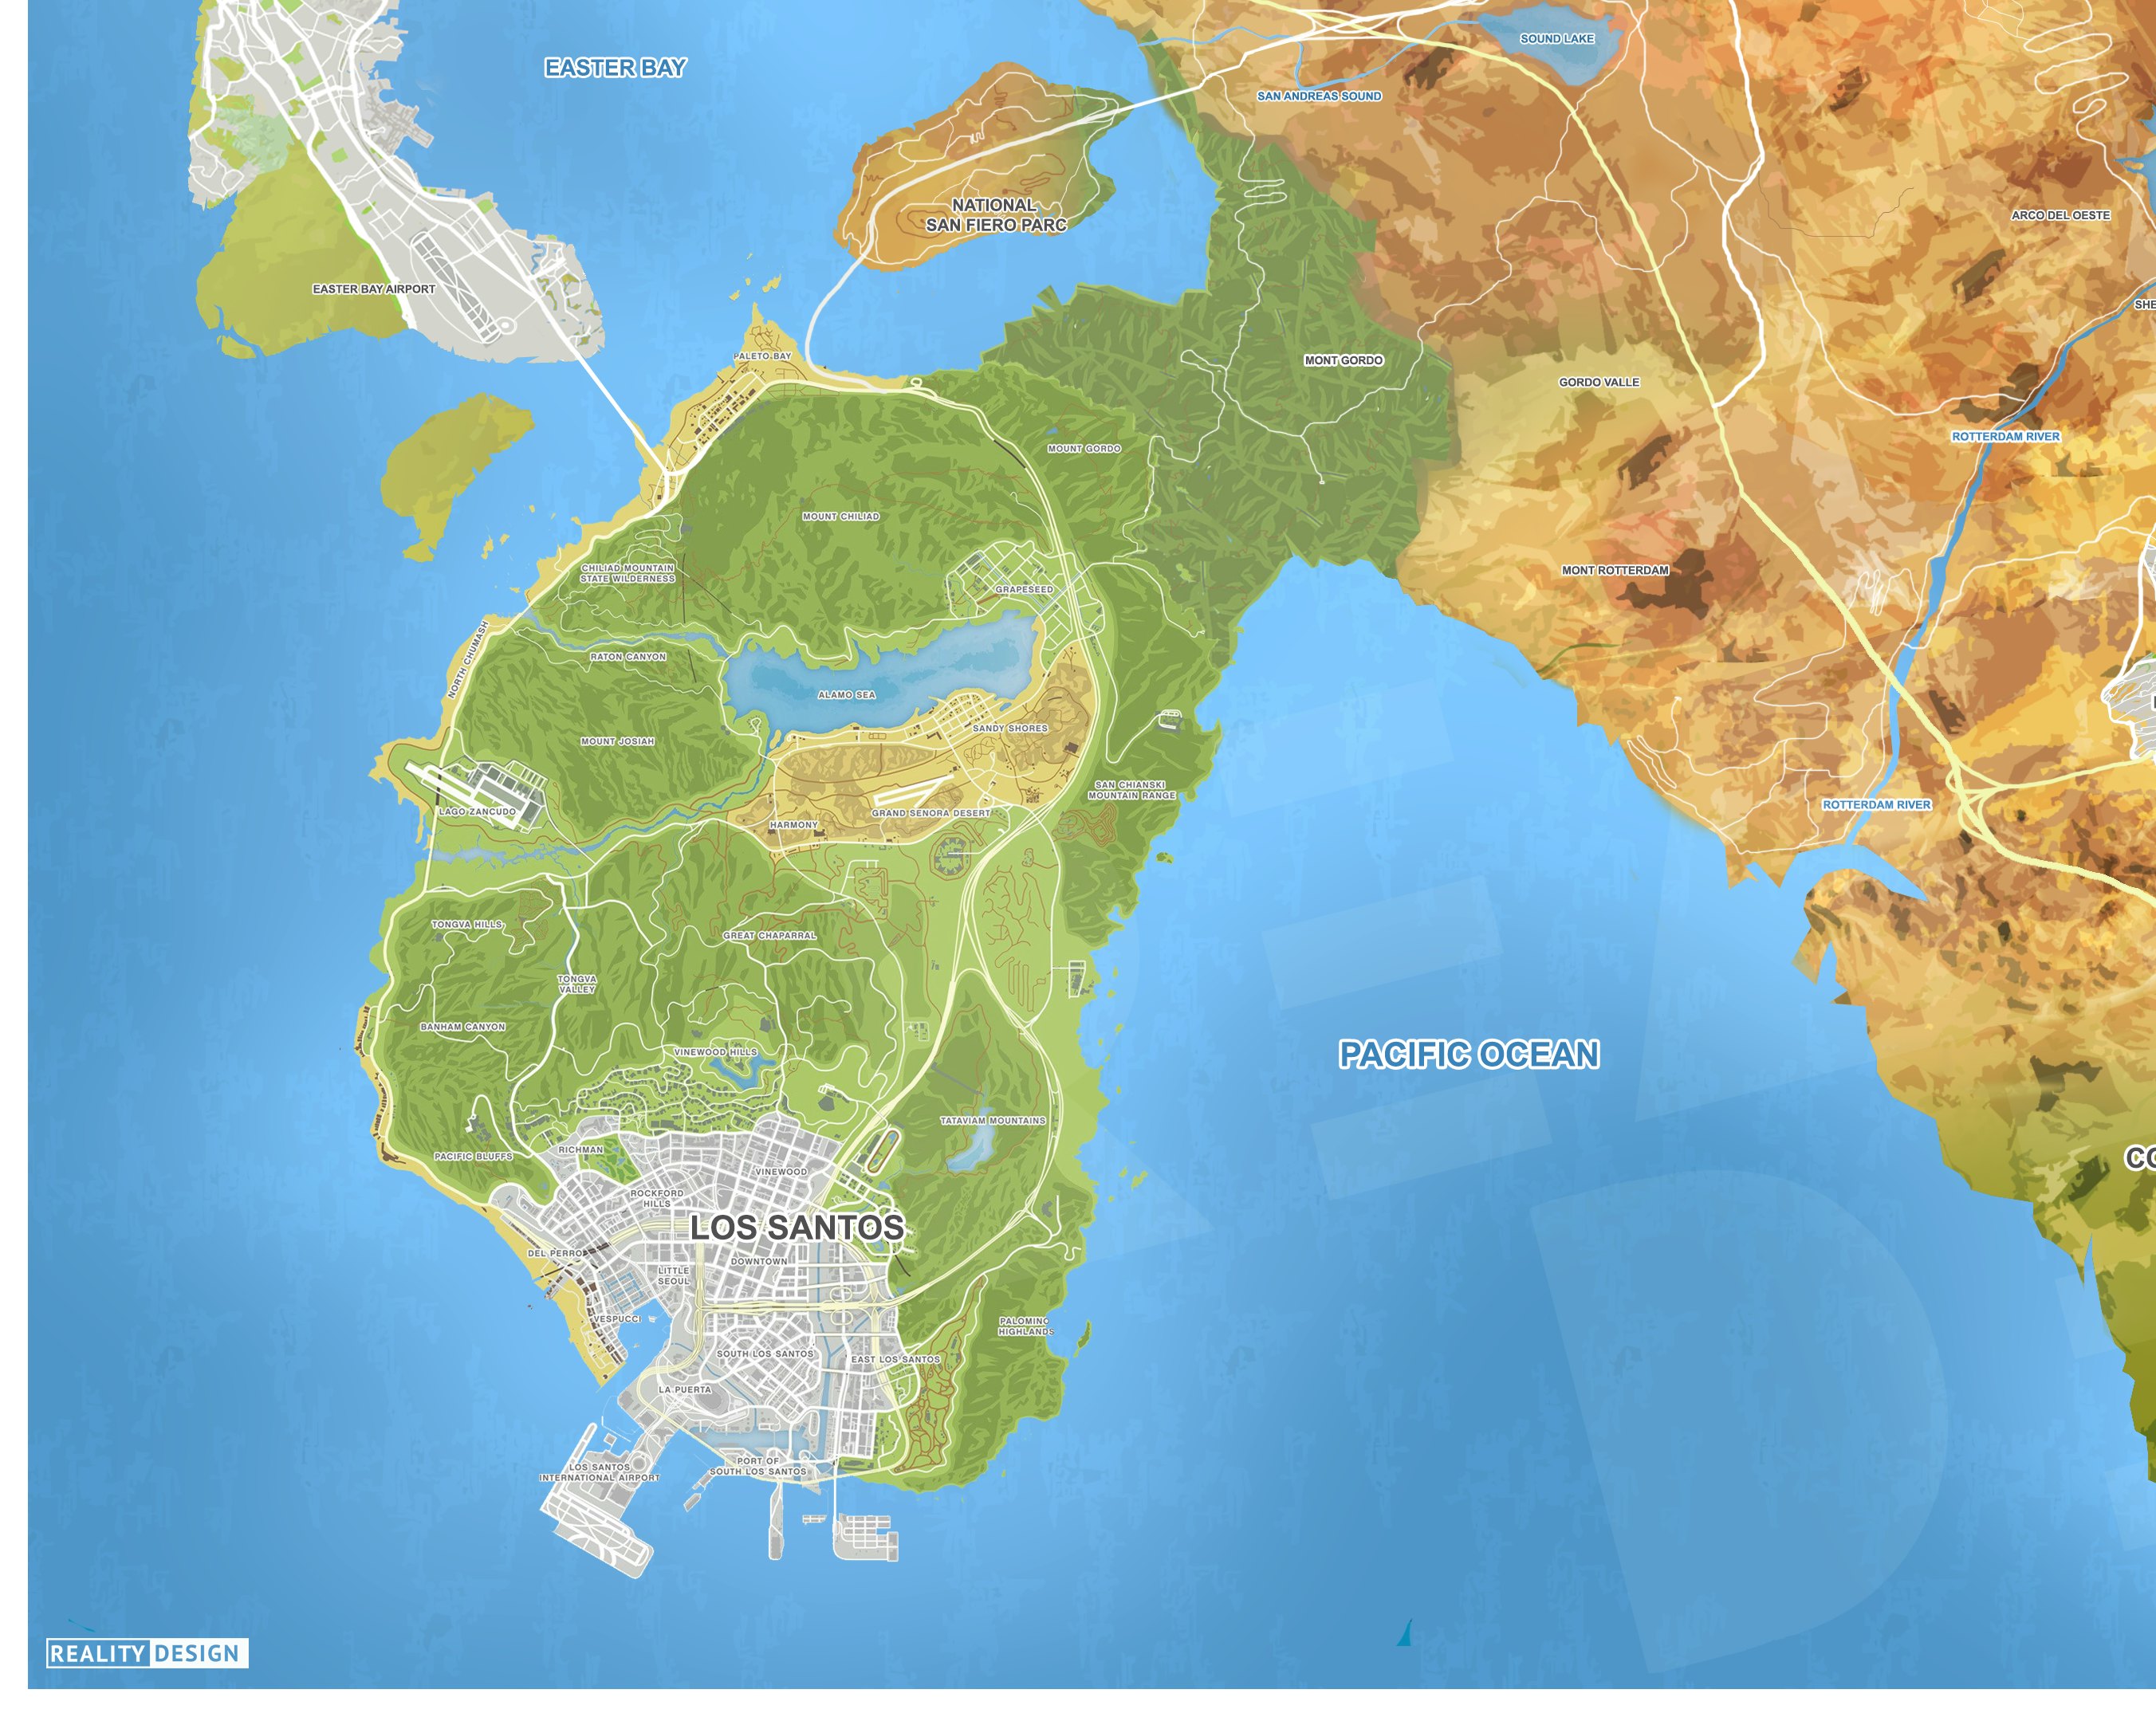 Gta 6 Leaks Inspire Fan Made Maps Bringing The Rumored Game To Life